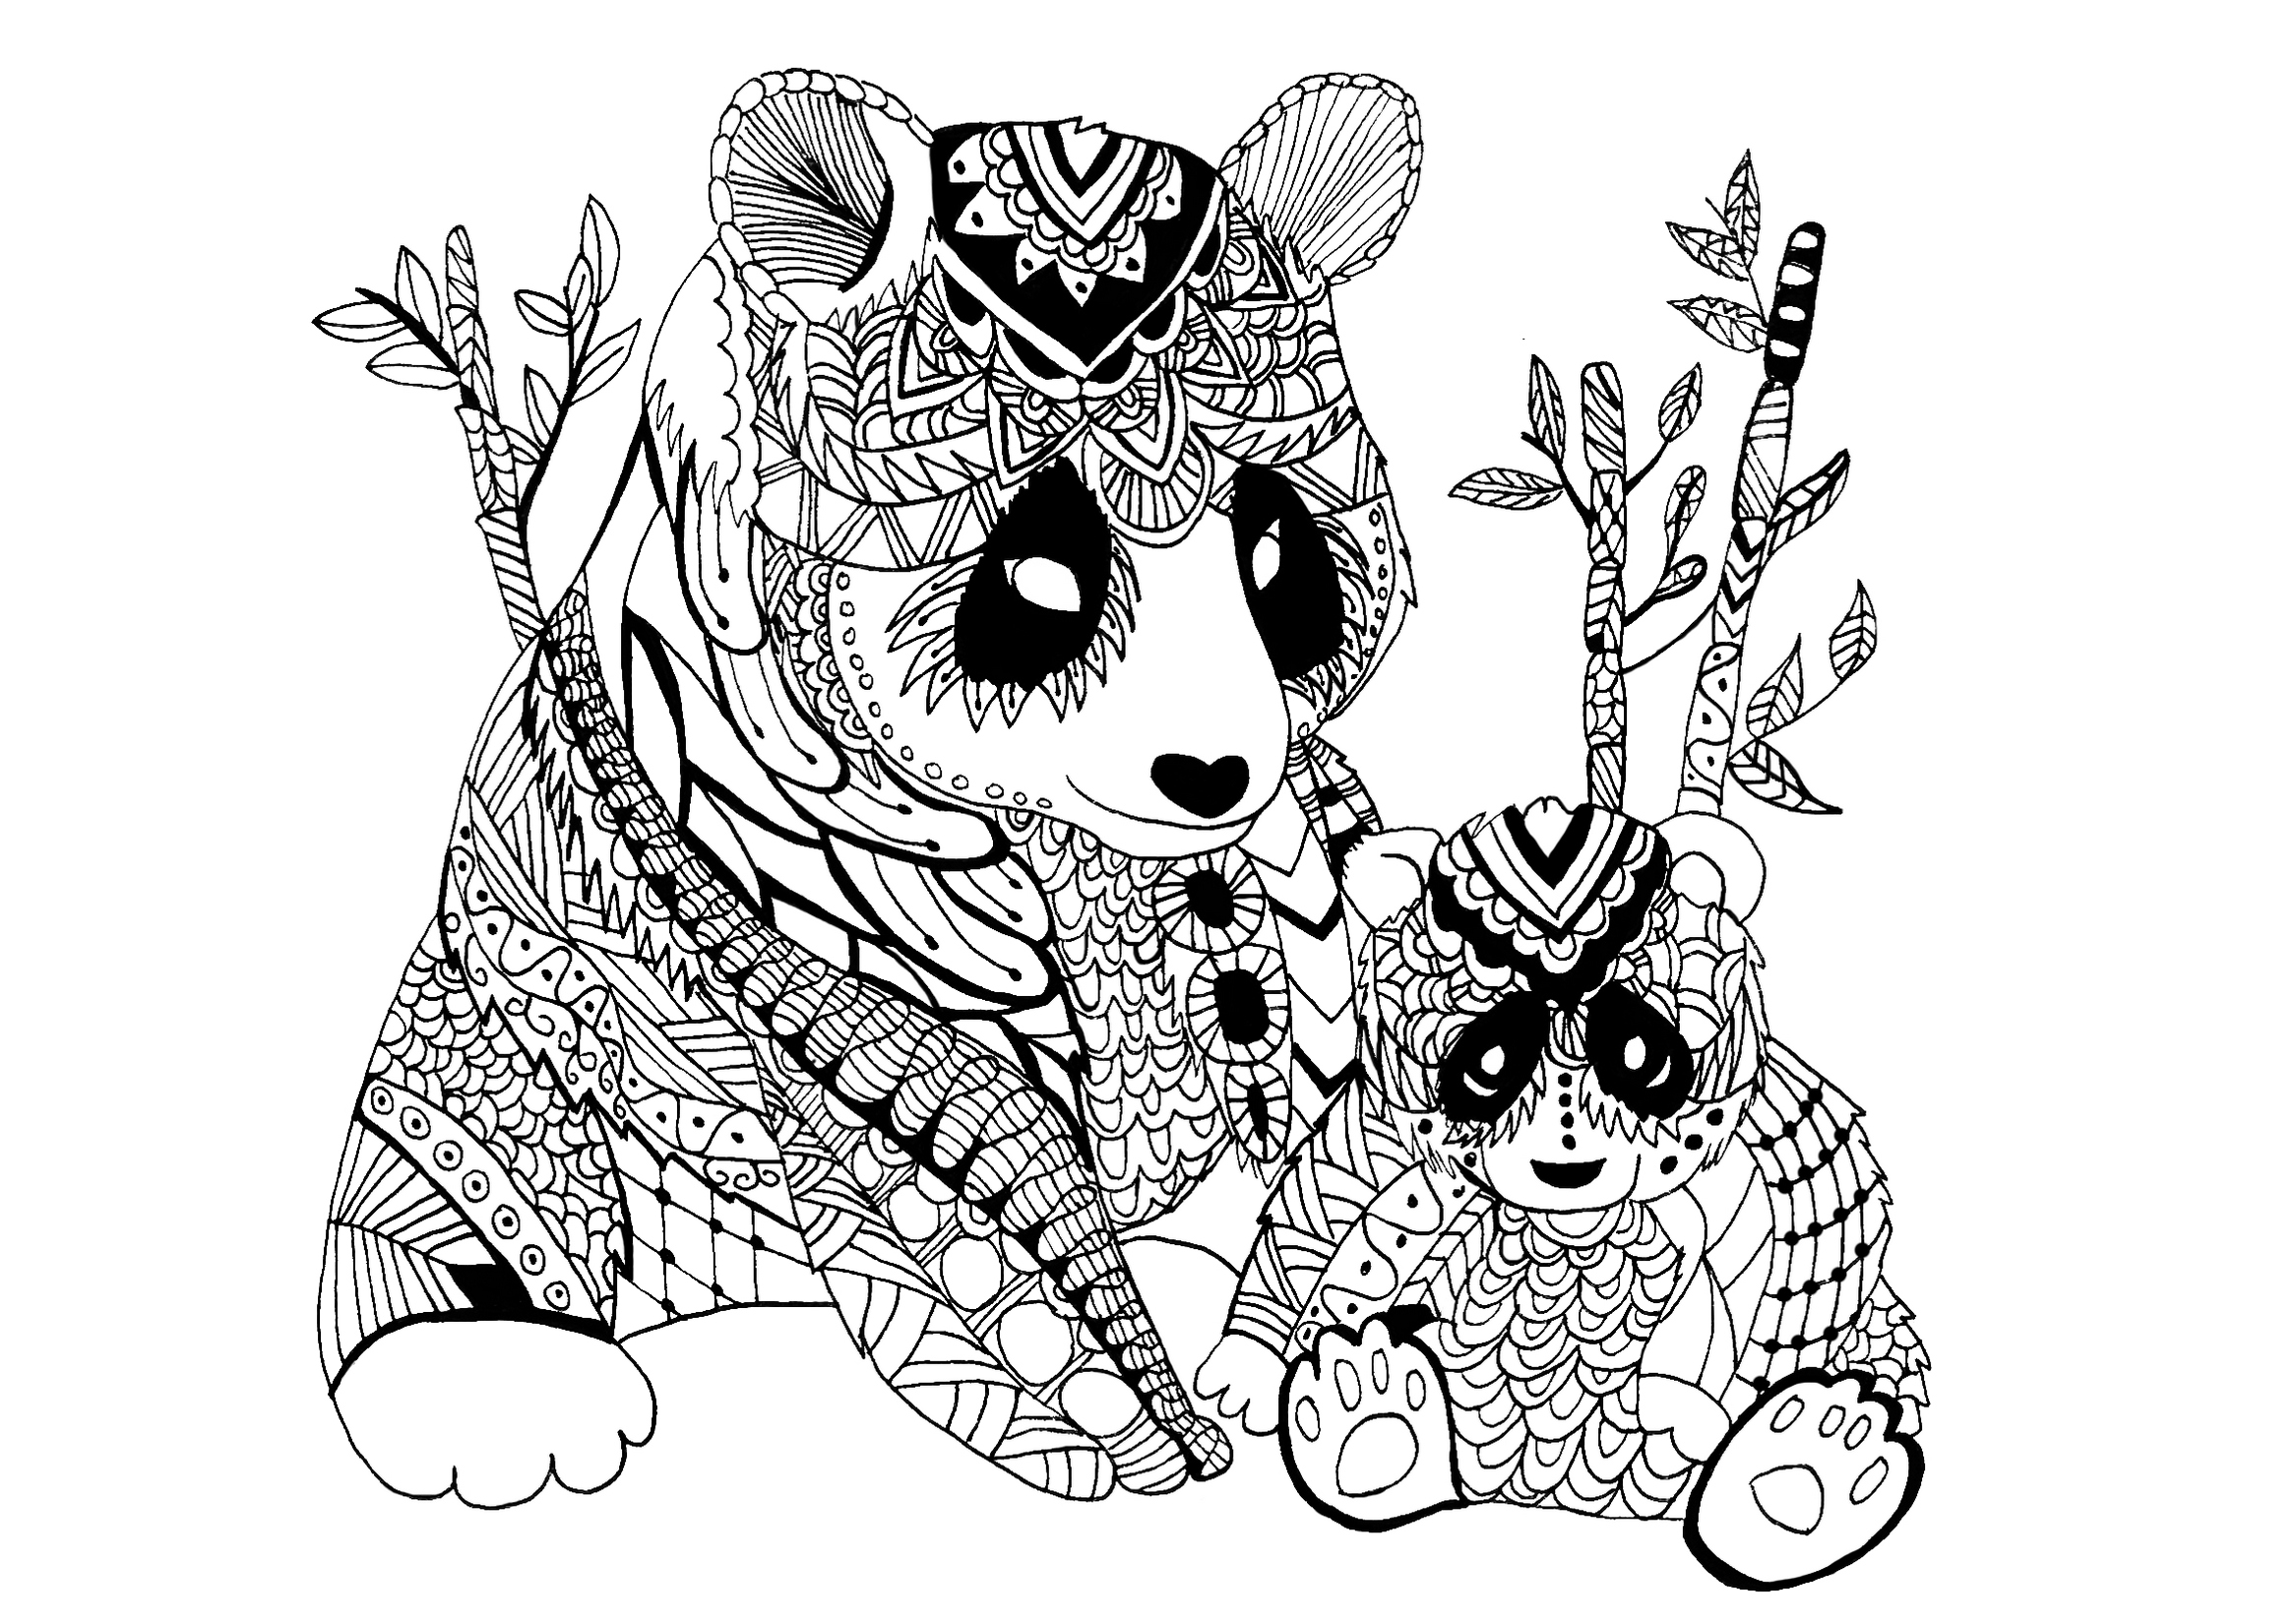 panda-and-baby-zentangle-coloring-picture